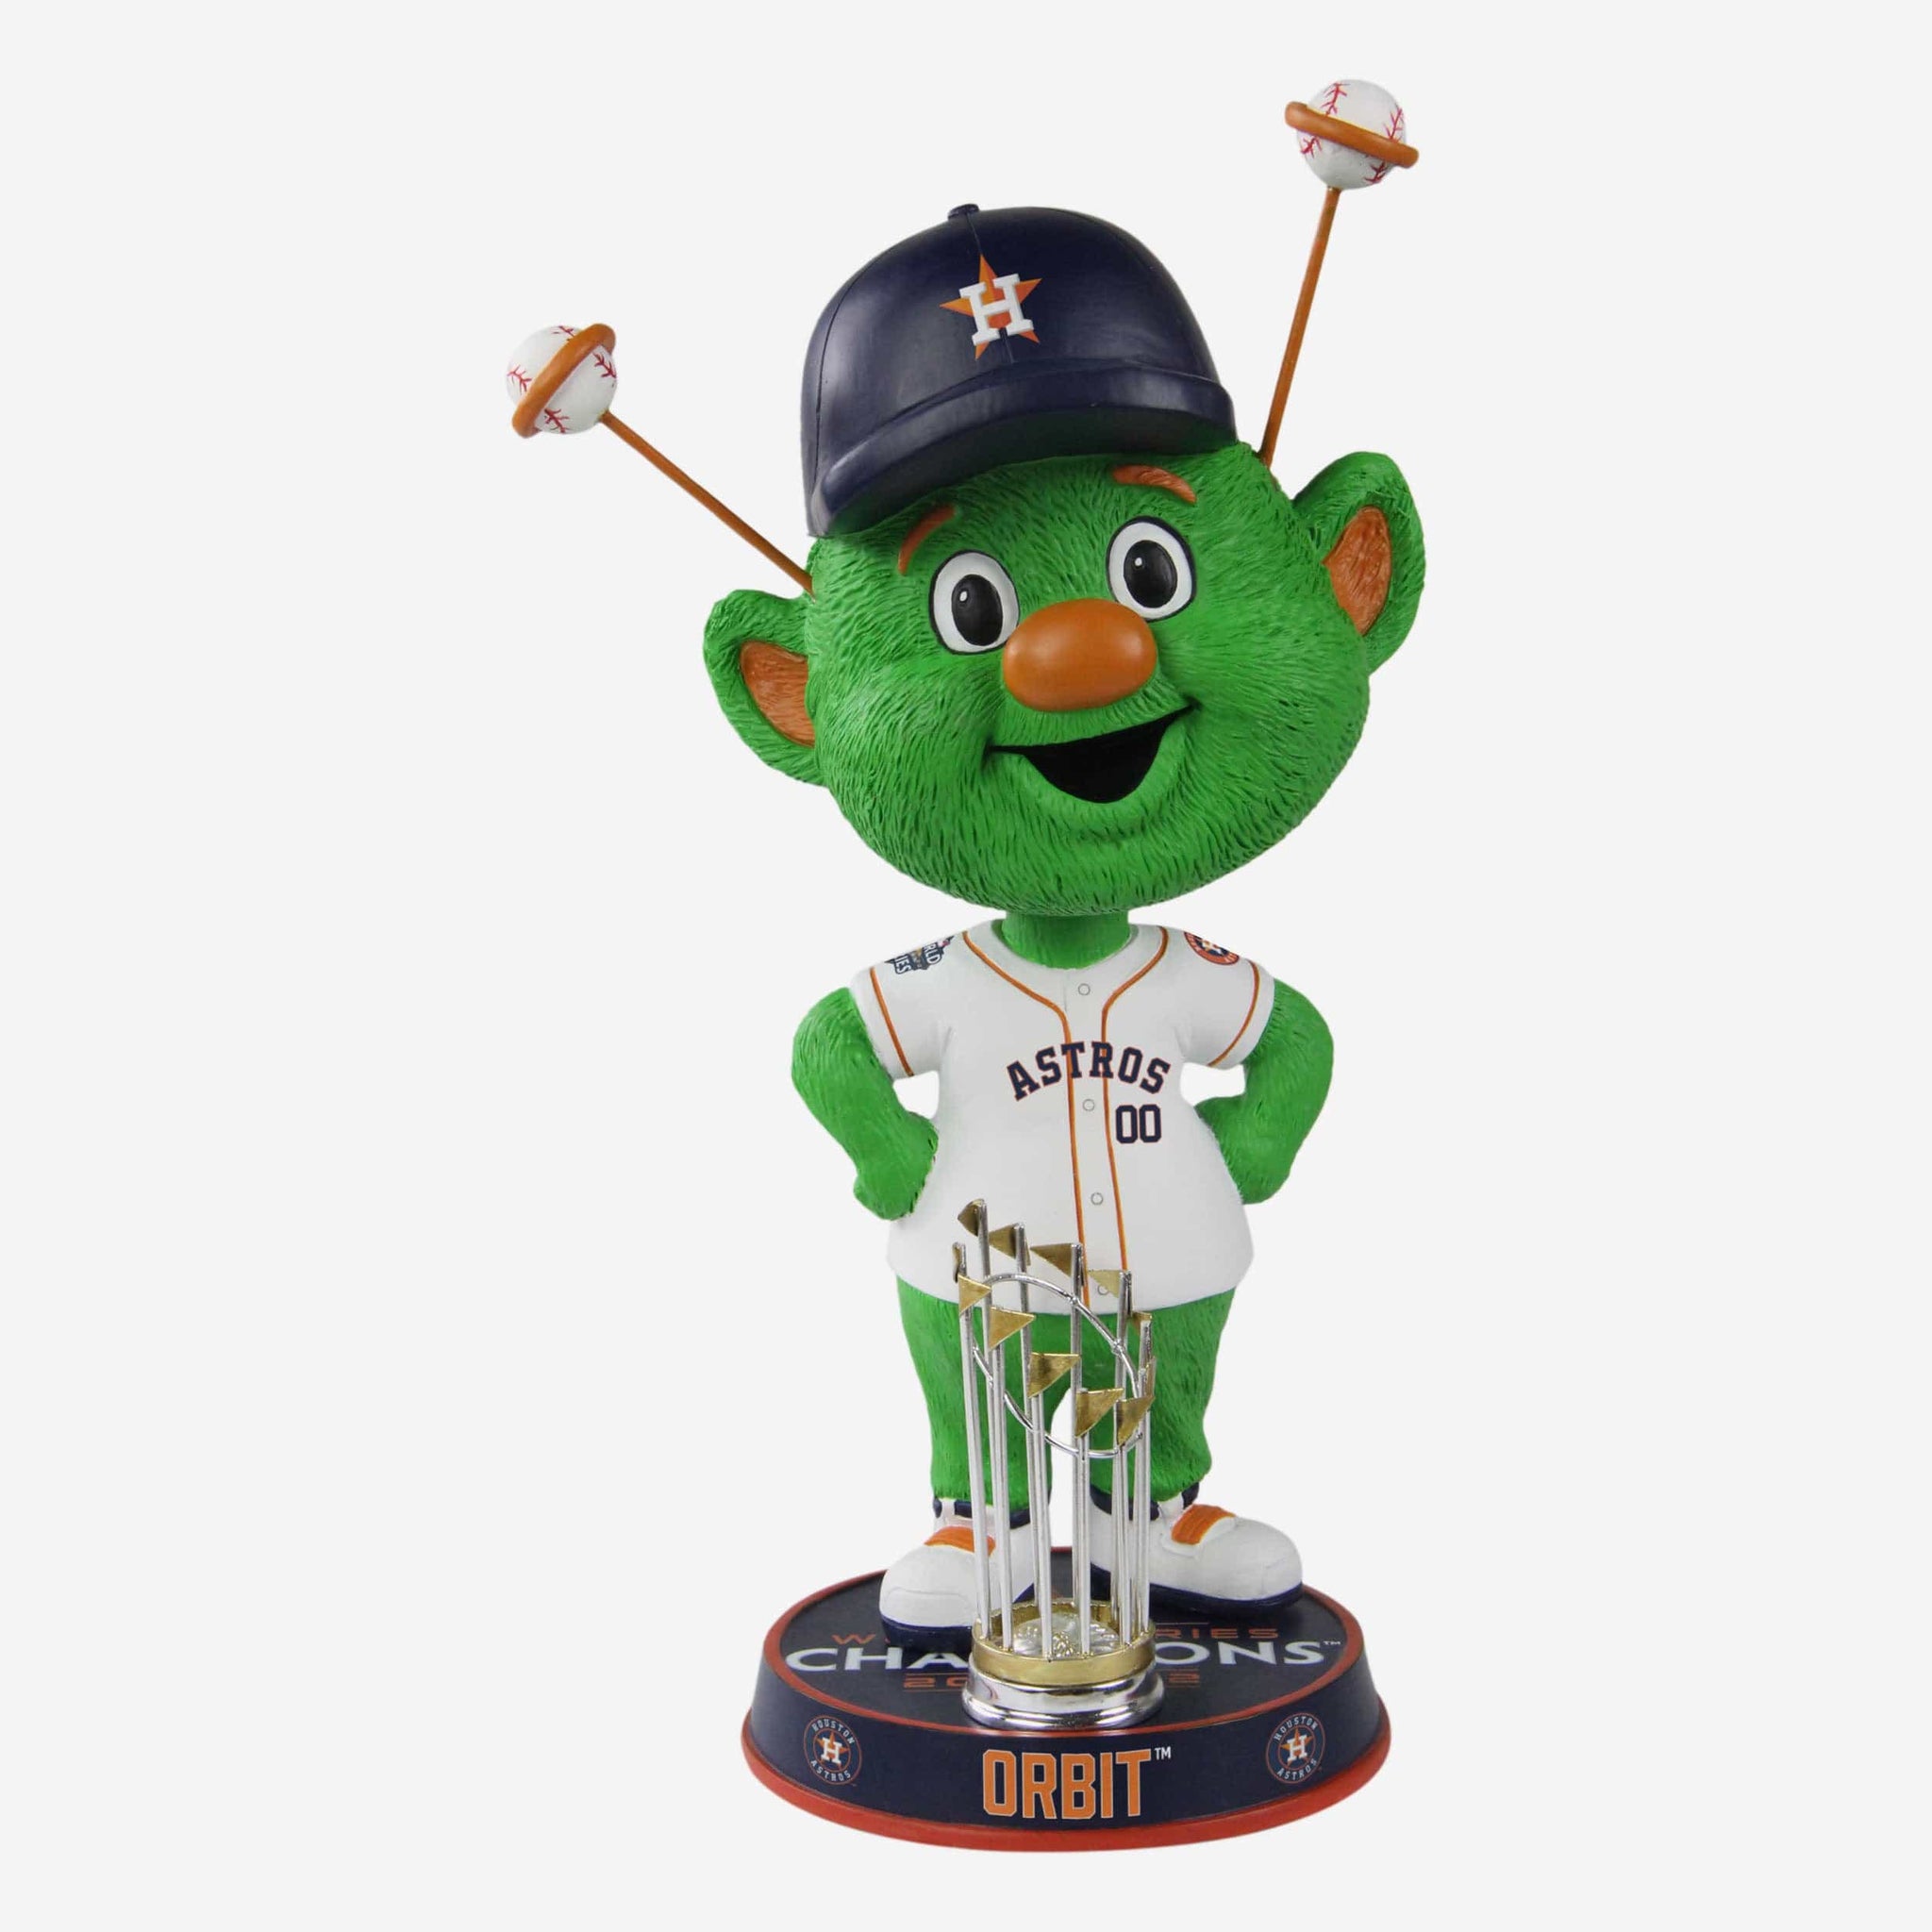 Orbit Houston Astros 2023 City Connect Field Stripe Mascot Bighead Bobblehead Officially Licensed by MLB